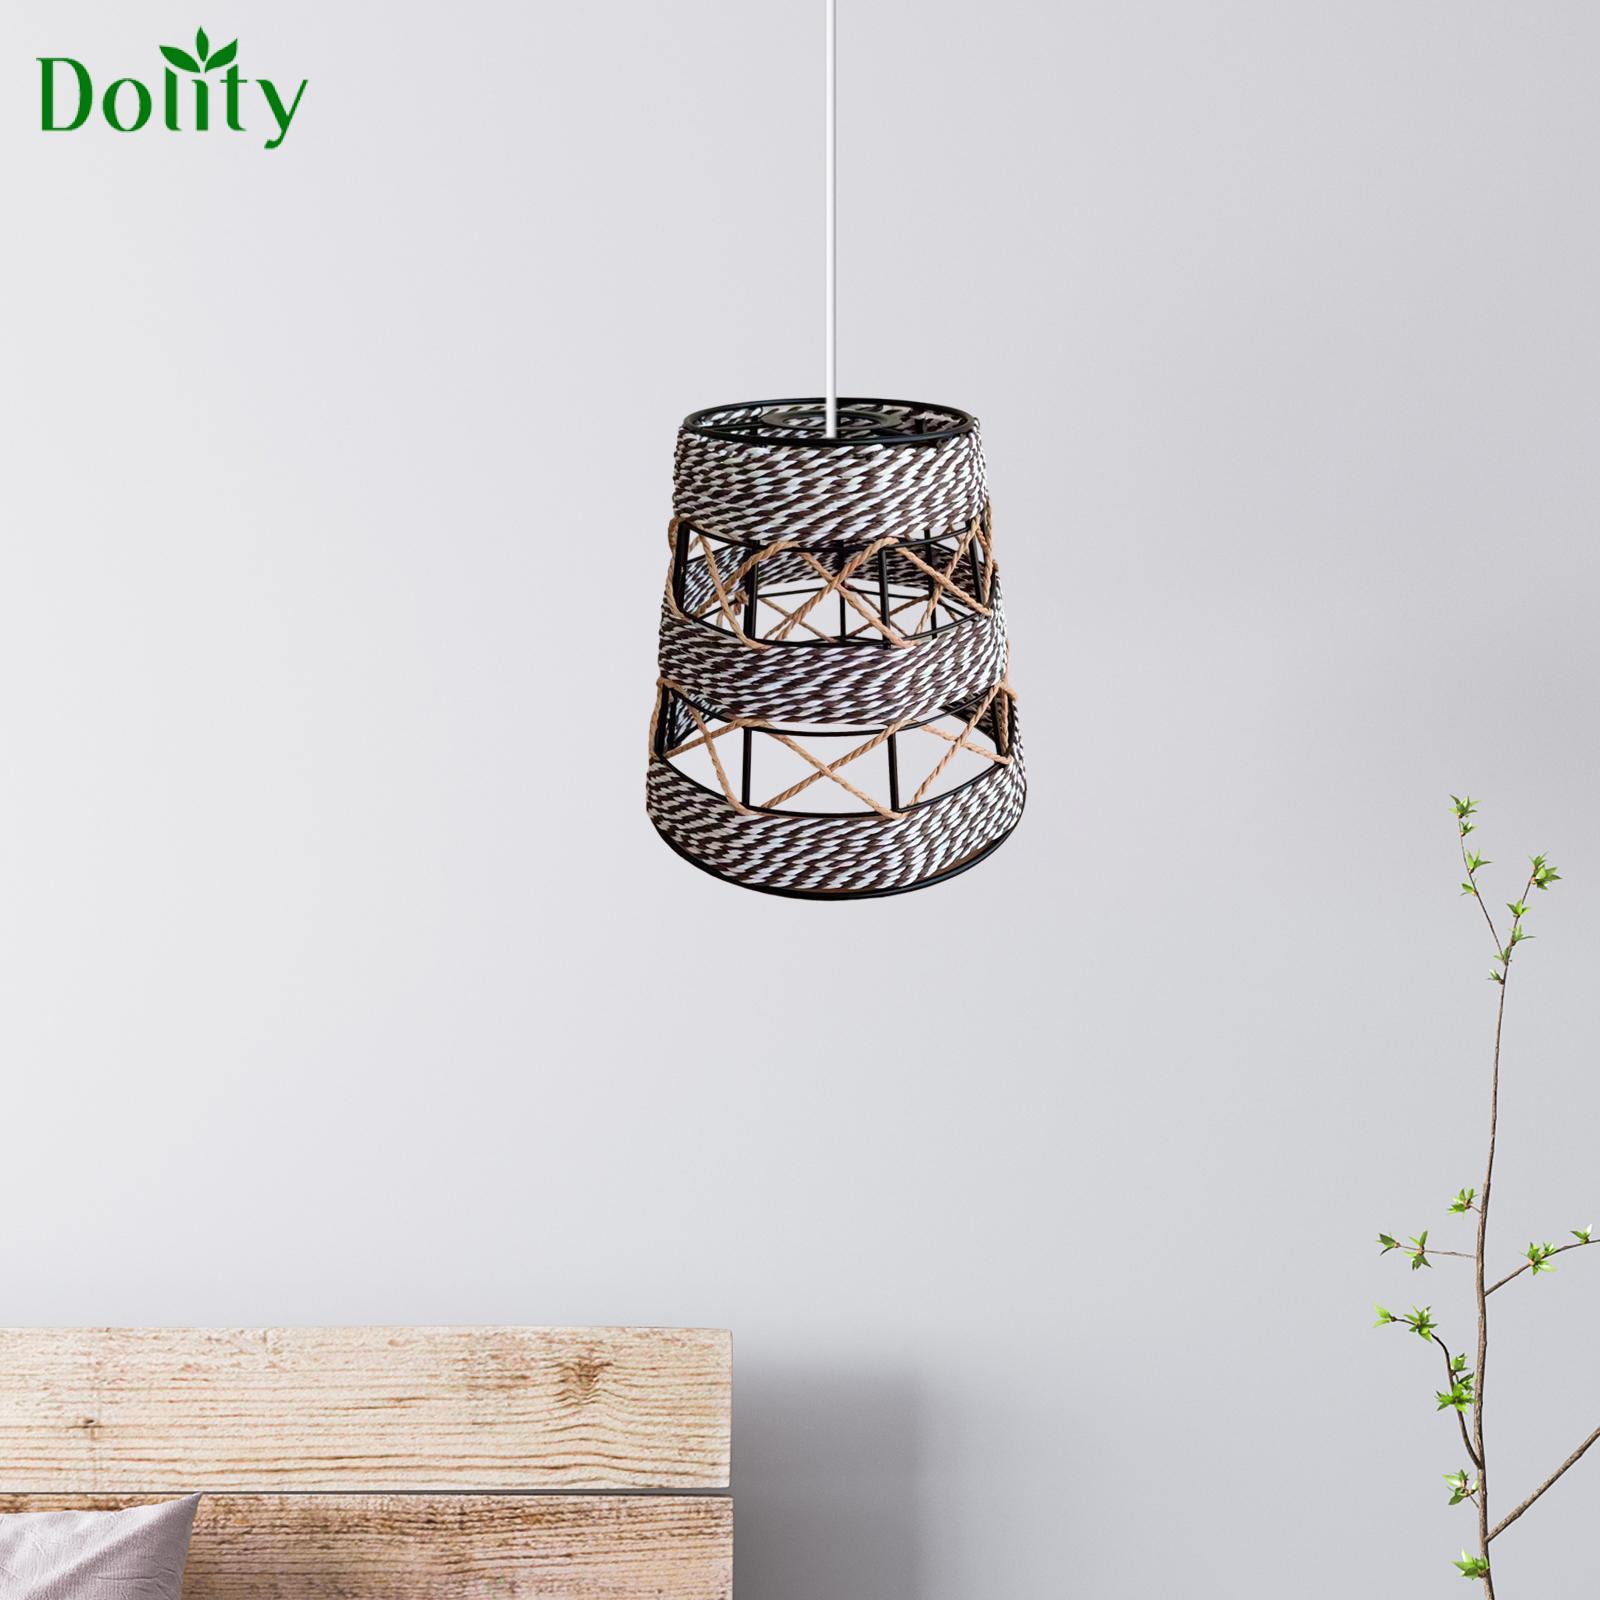 Dolity Light Shade Decor Hand Weave Lampshade for Hotel Restaurant Dining